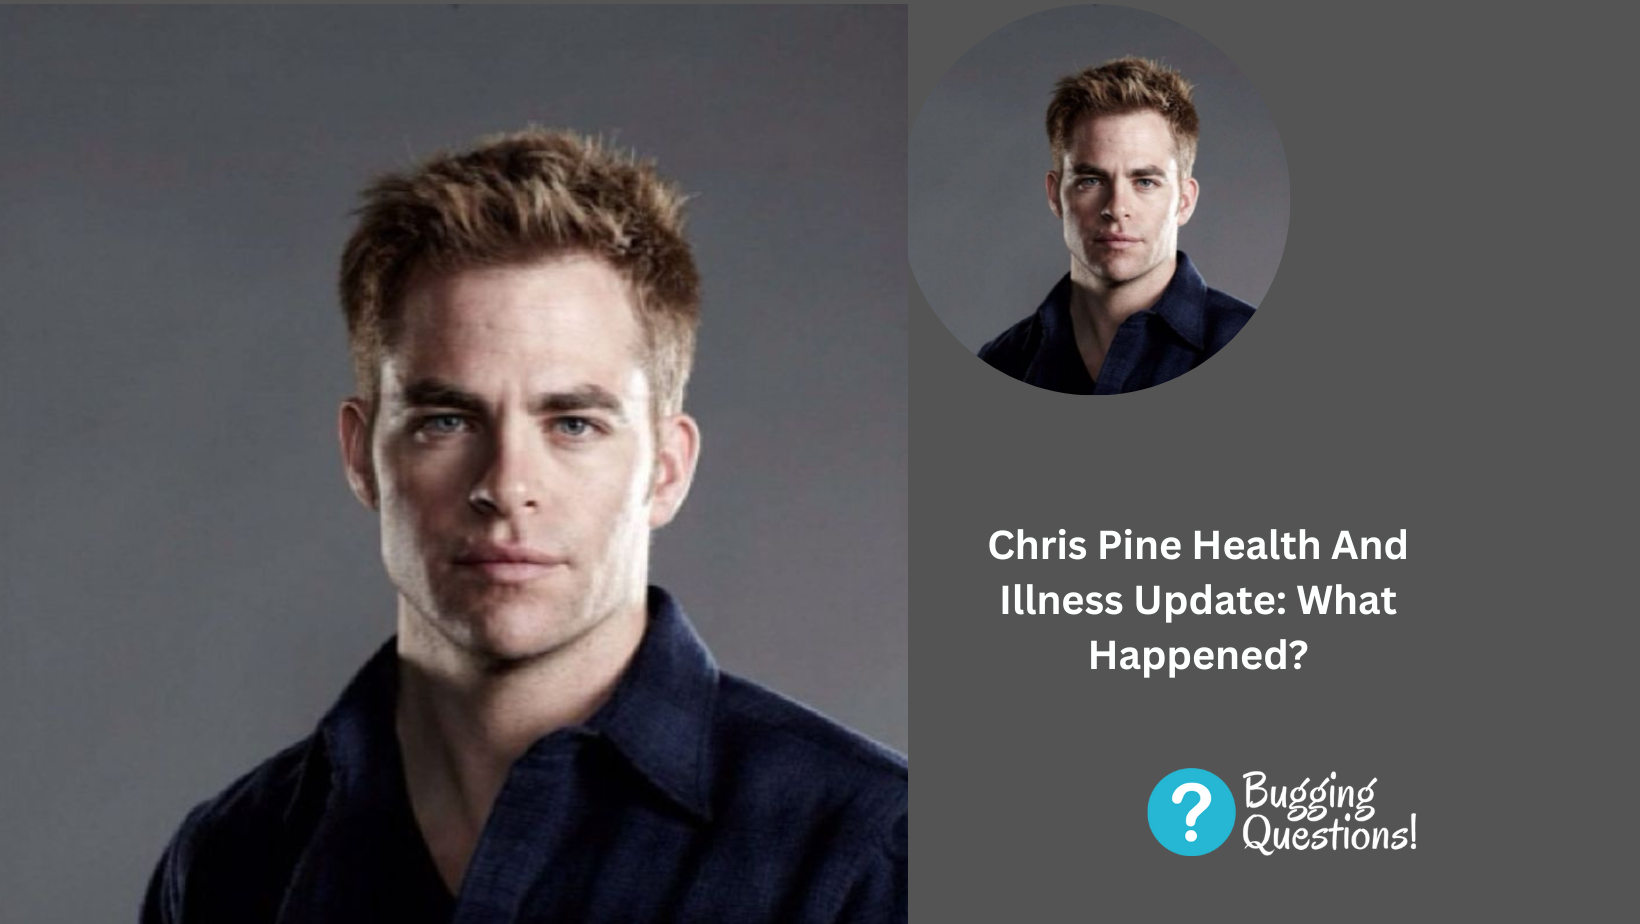 Chris Pine Health And Illness Update: What Happened?